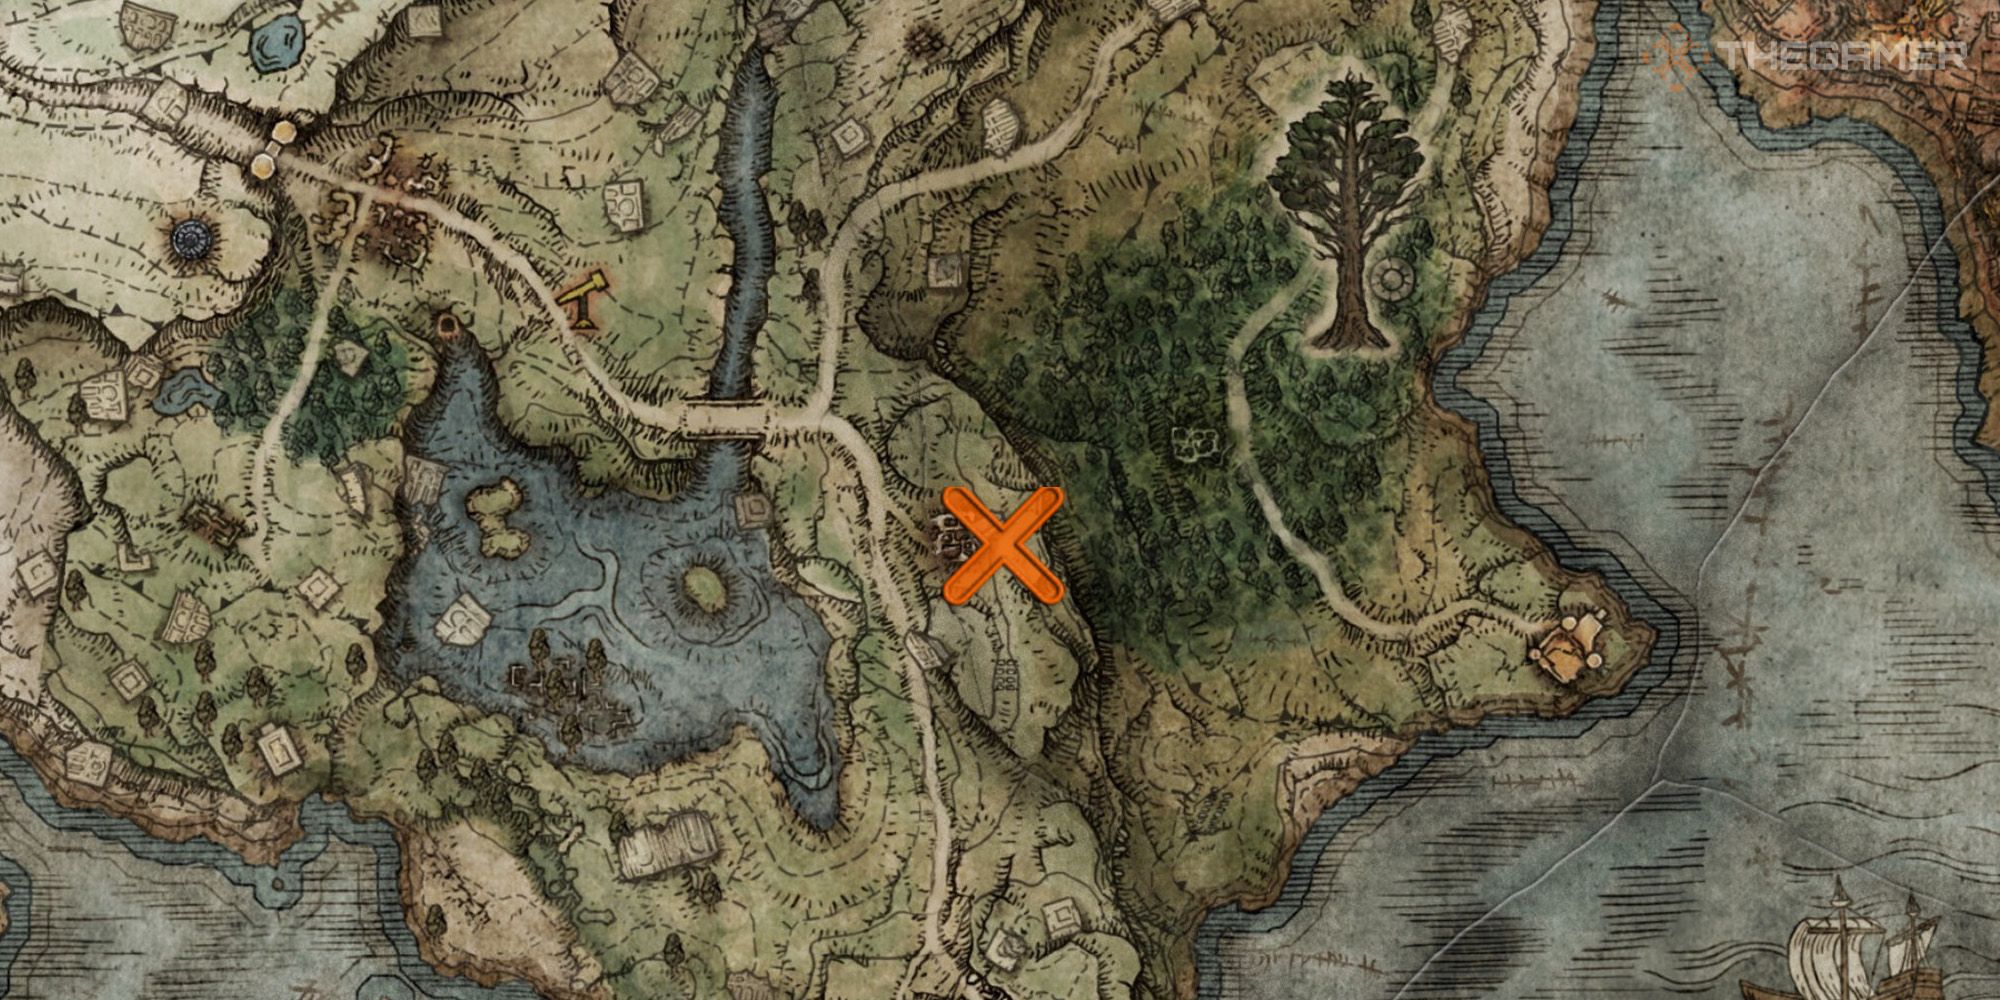 Map showing the first location of Sorceress Sellen in the Waypoint Ruins in Limgrave in Elden Ring